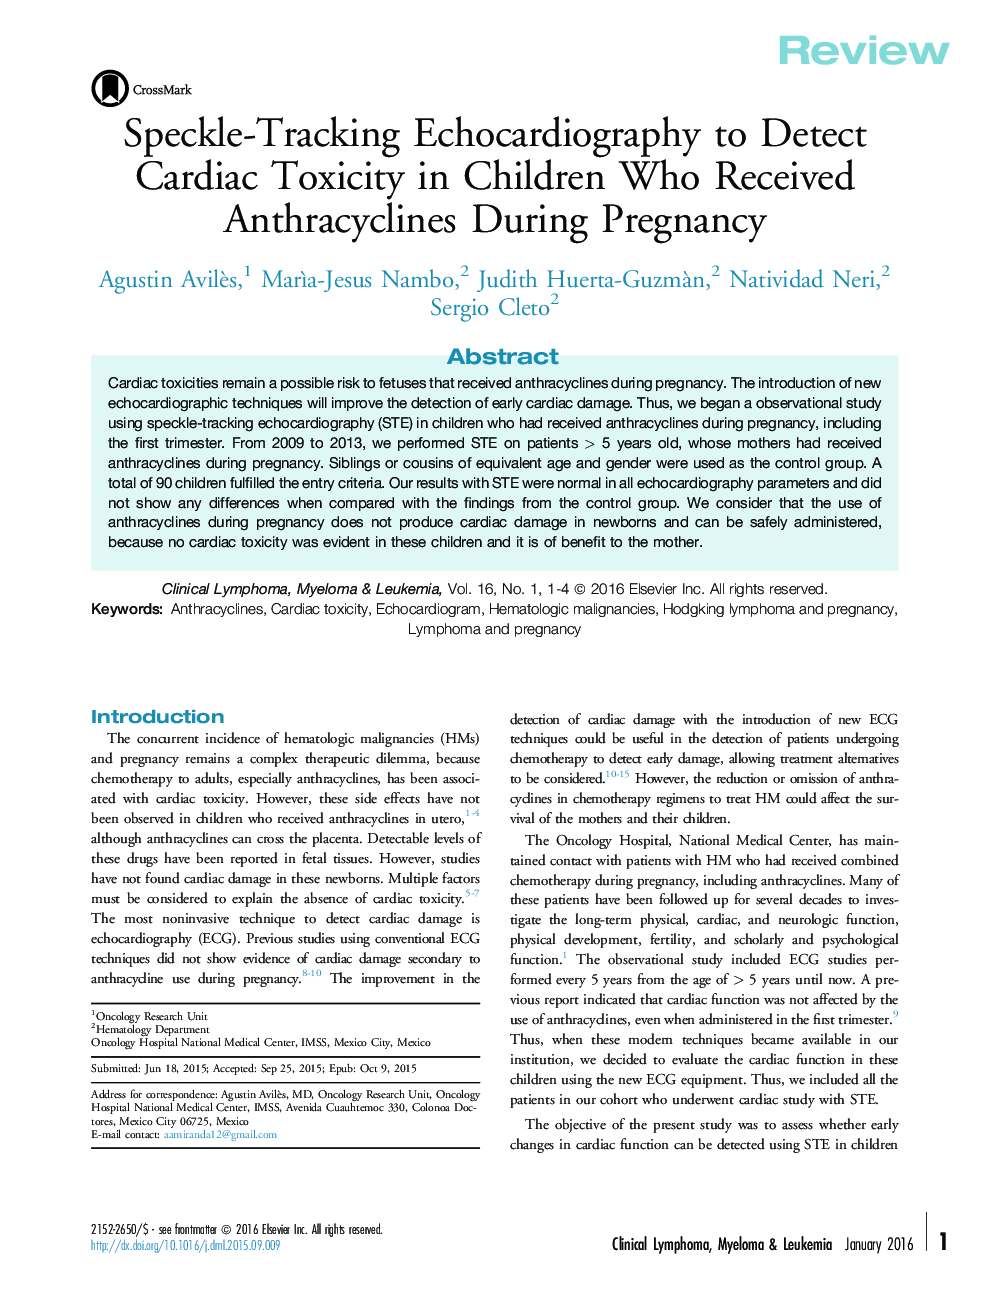 Speckle-Tracking Echocardiography to Detect Cardiac Toxicity in Children Who Received Anthracyclines During Pregnancy